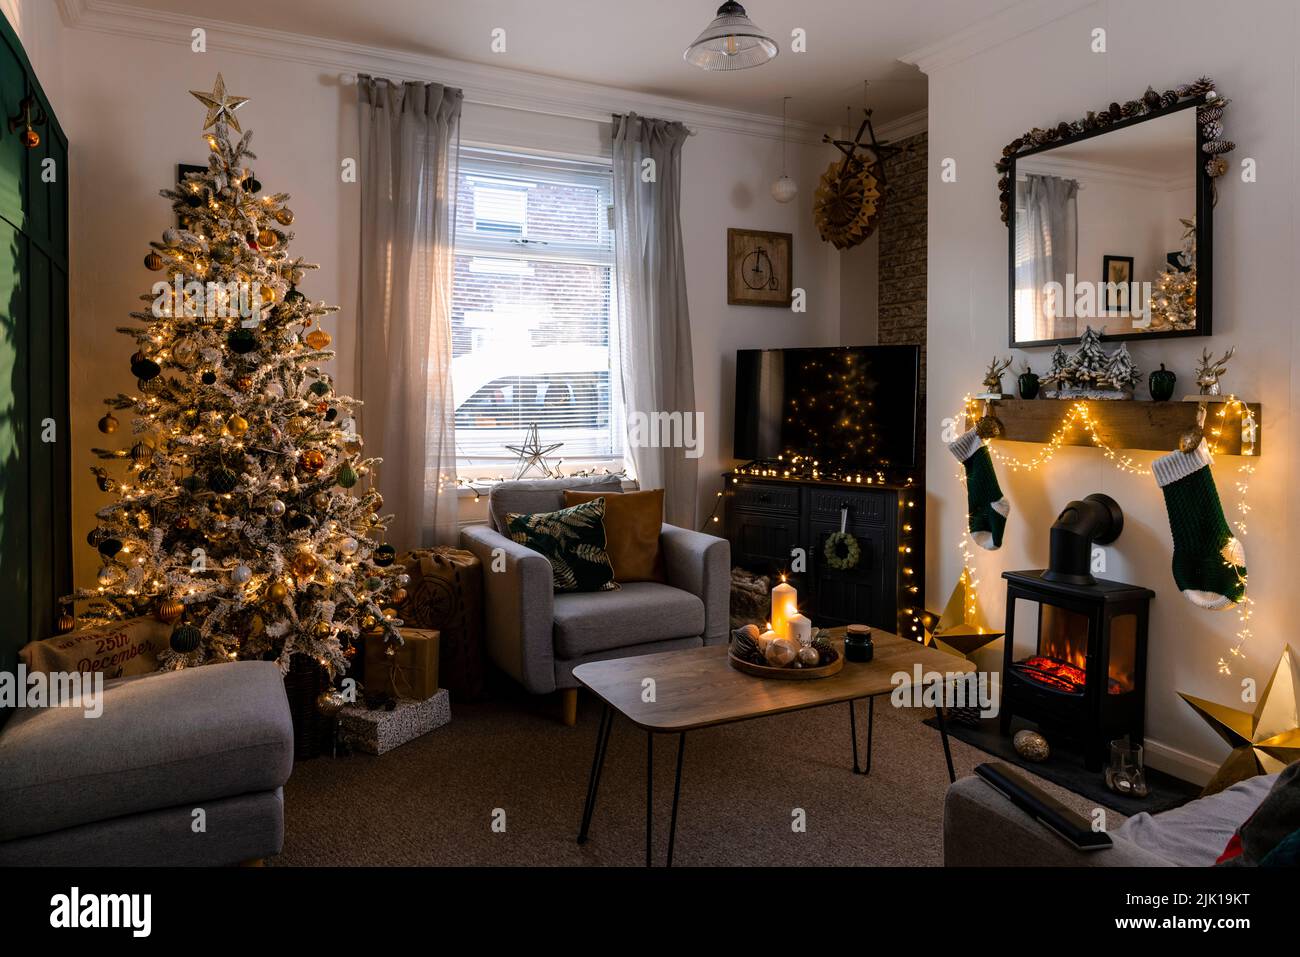 A wide shot of a Christmas tree decorated with golden-orange shiny balls and lights in a living room. Stock Photo